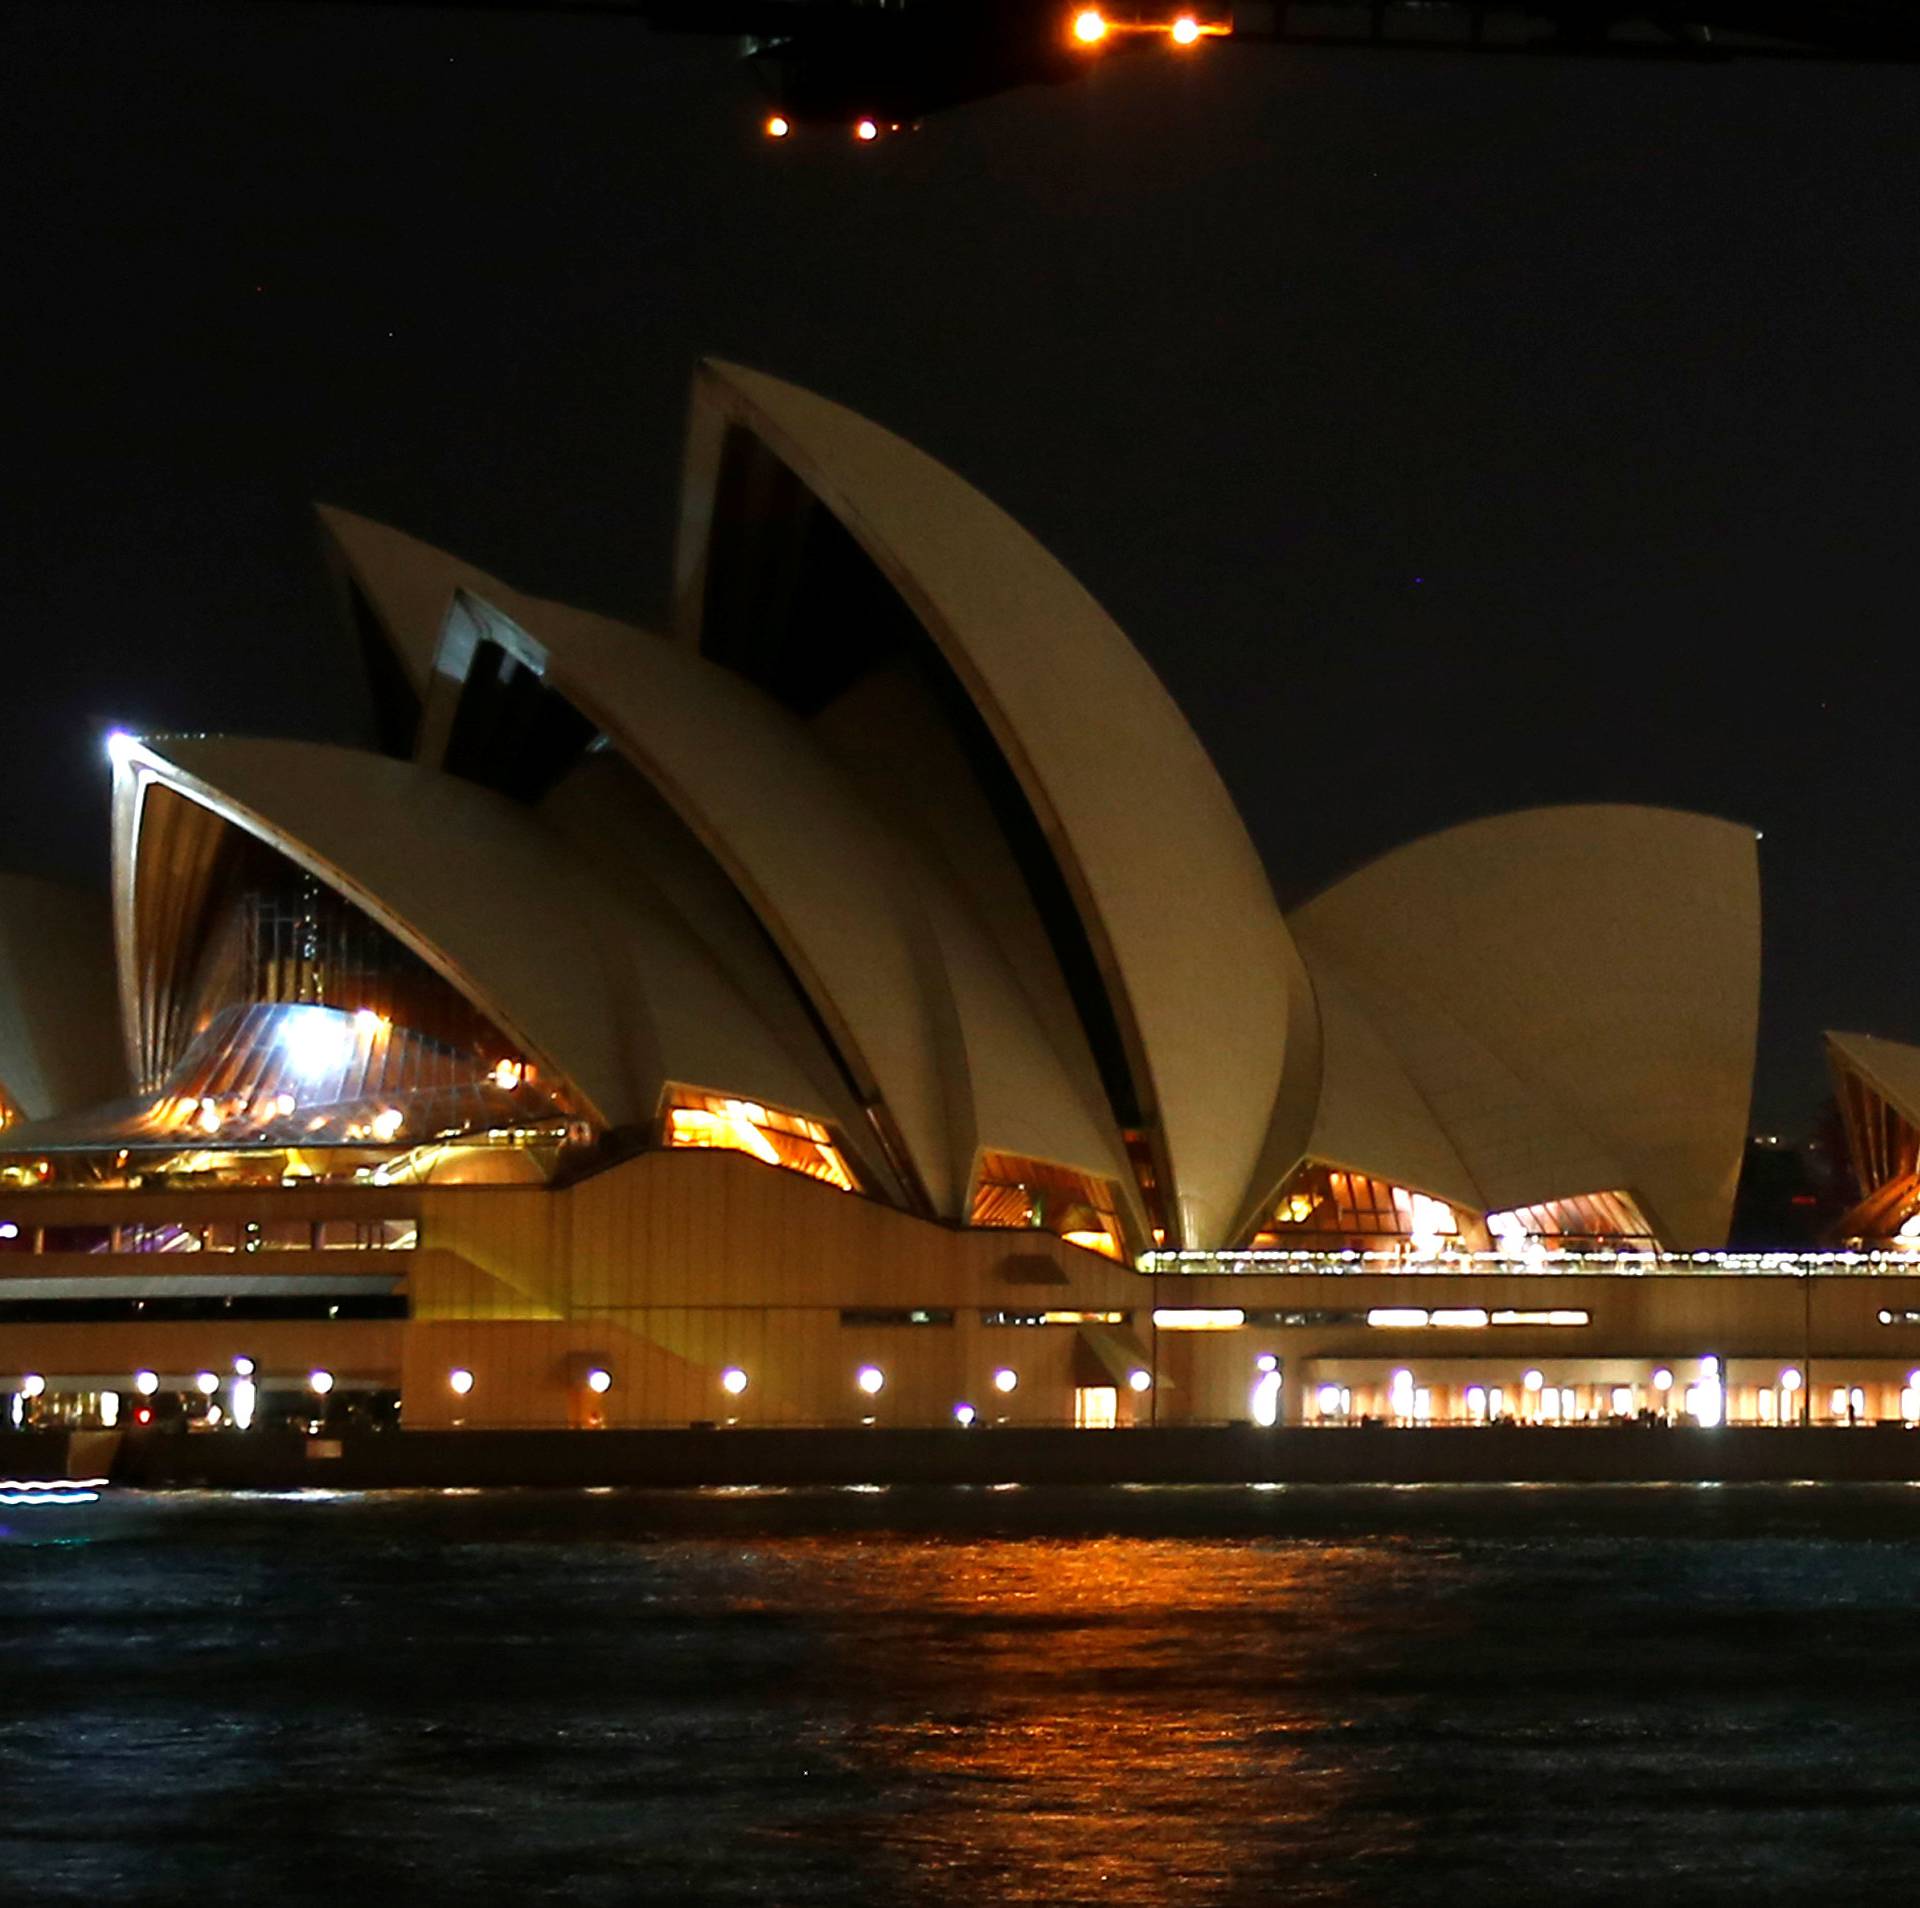 The Sydney Opera House seen during the tenth anniversary of Earth Hour in Sydney